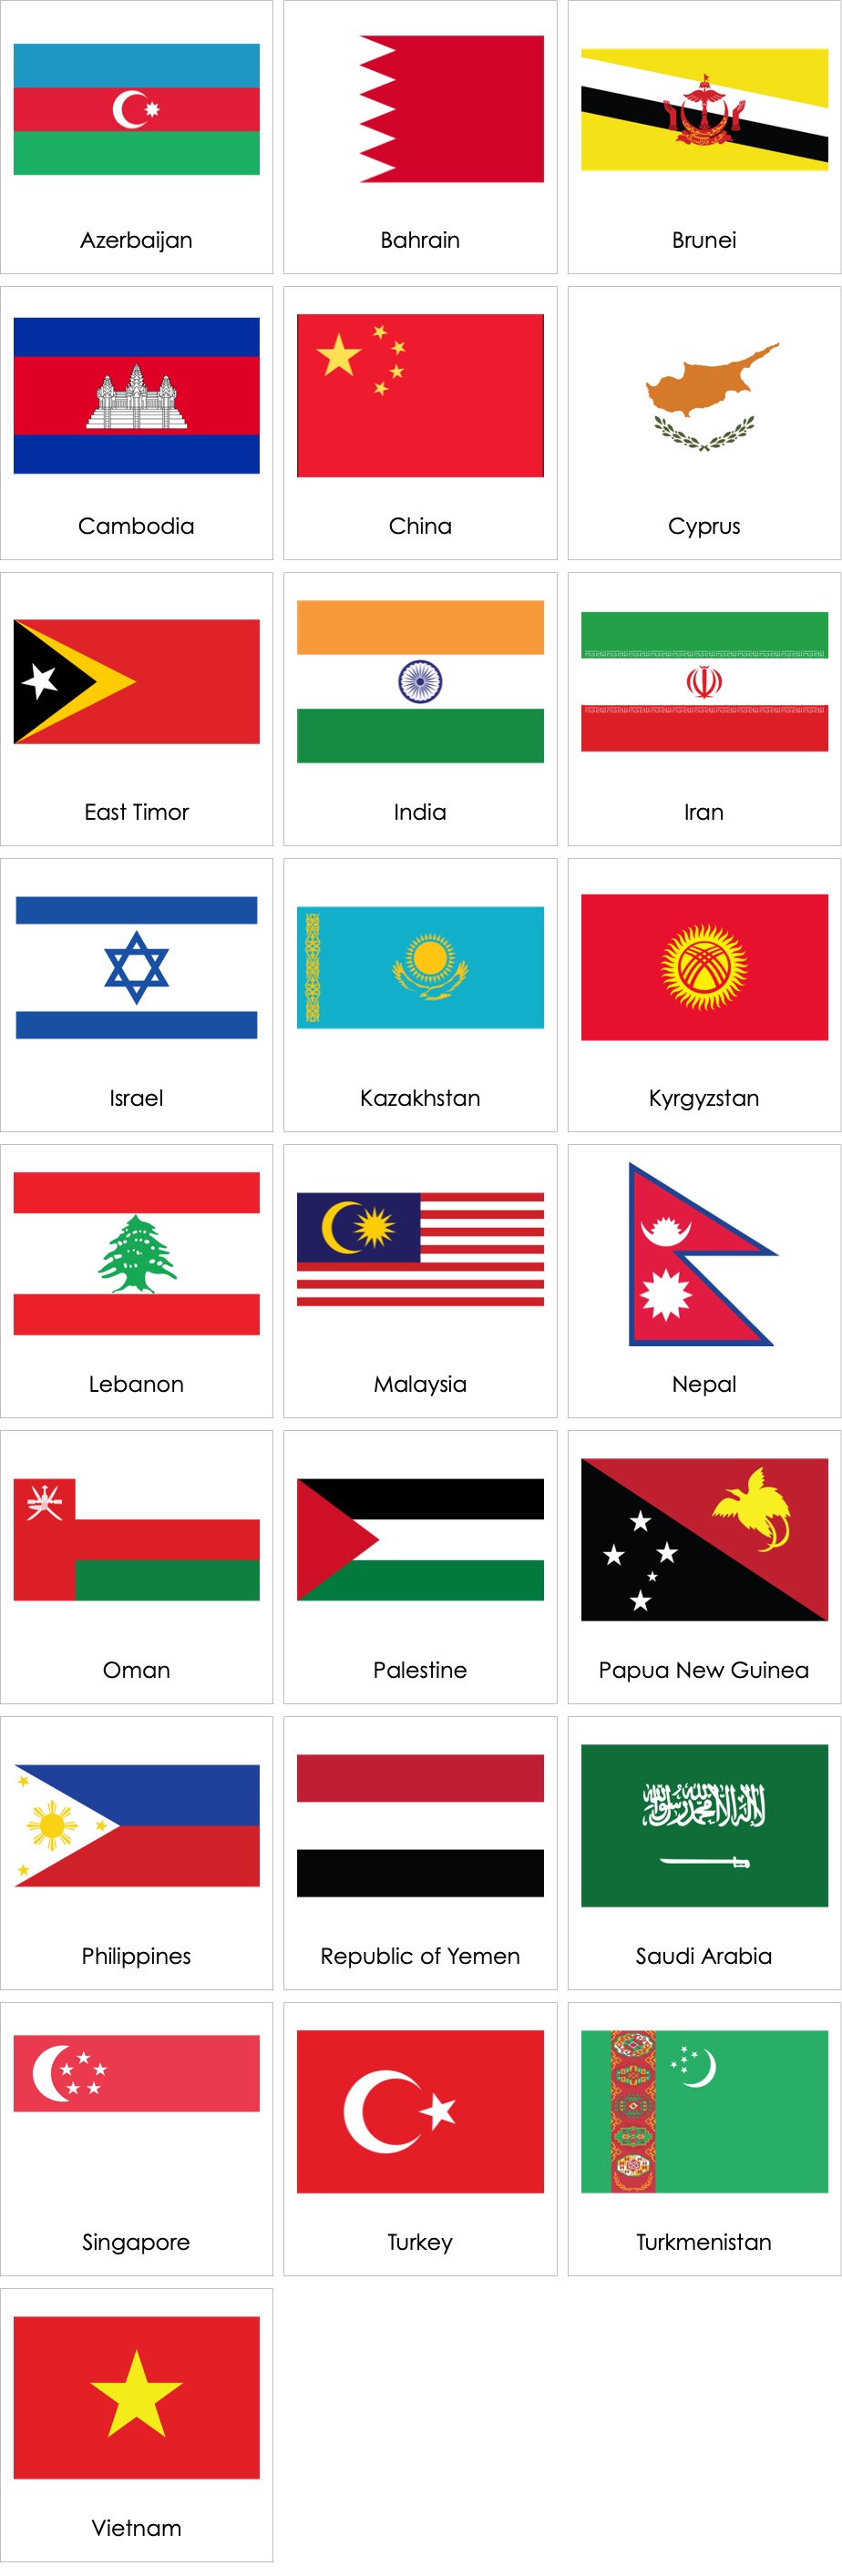 flags-of-asian-countries-02-ami-digital